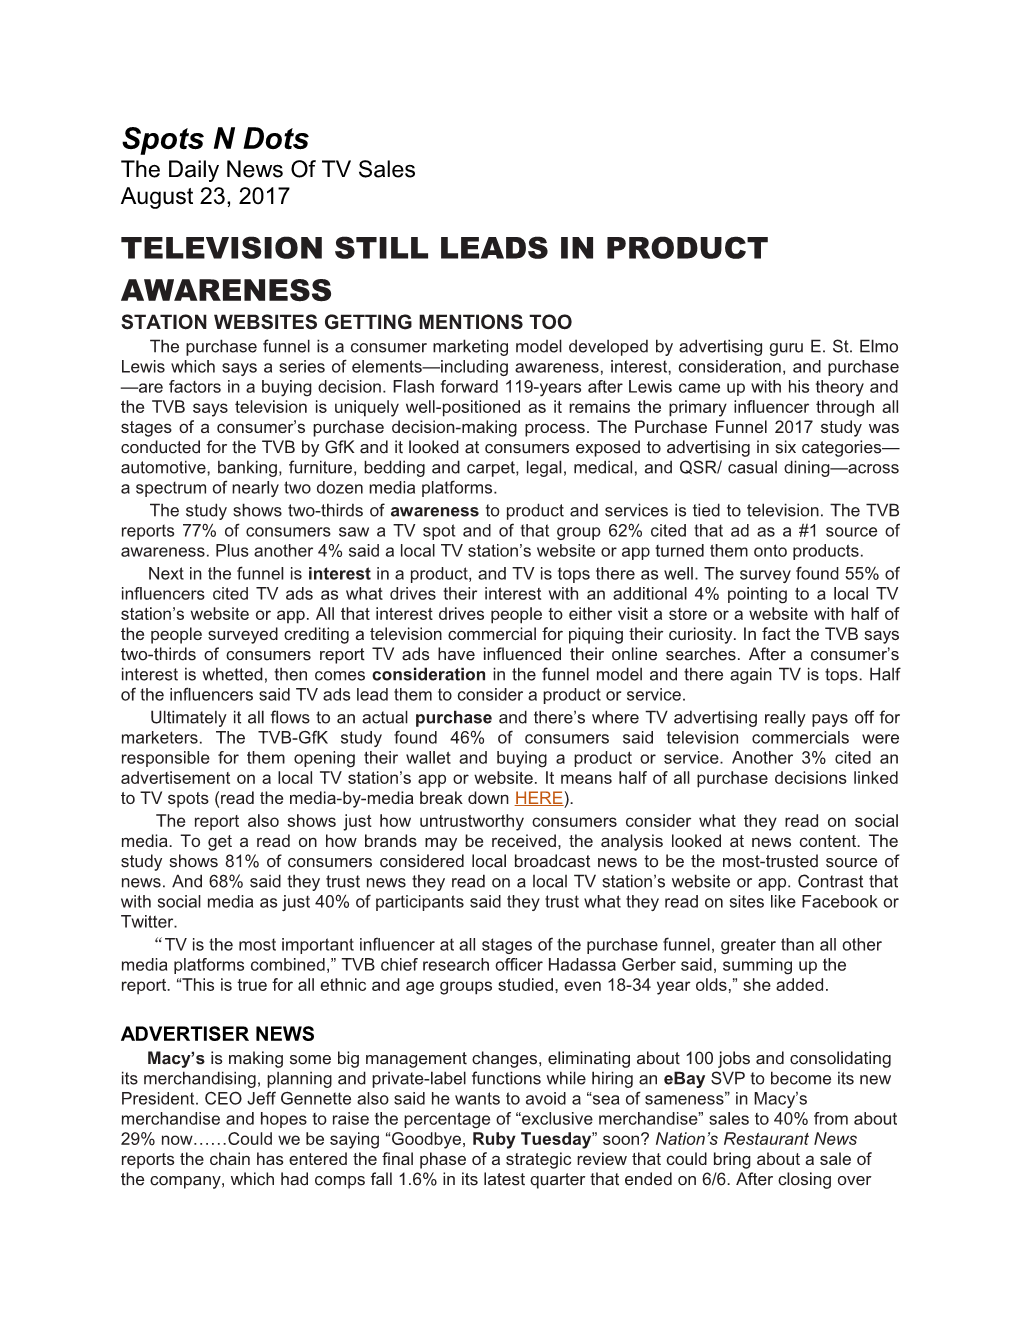 Television Still Leads in Product Awareness